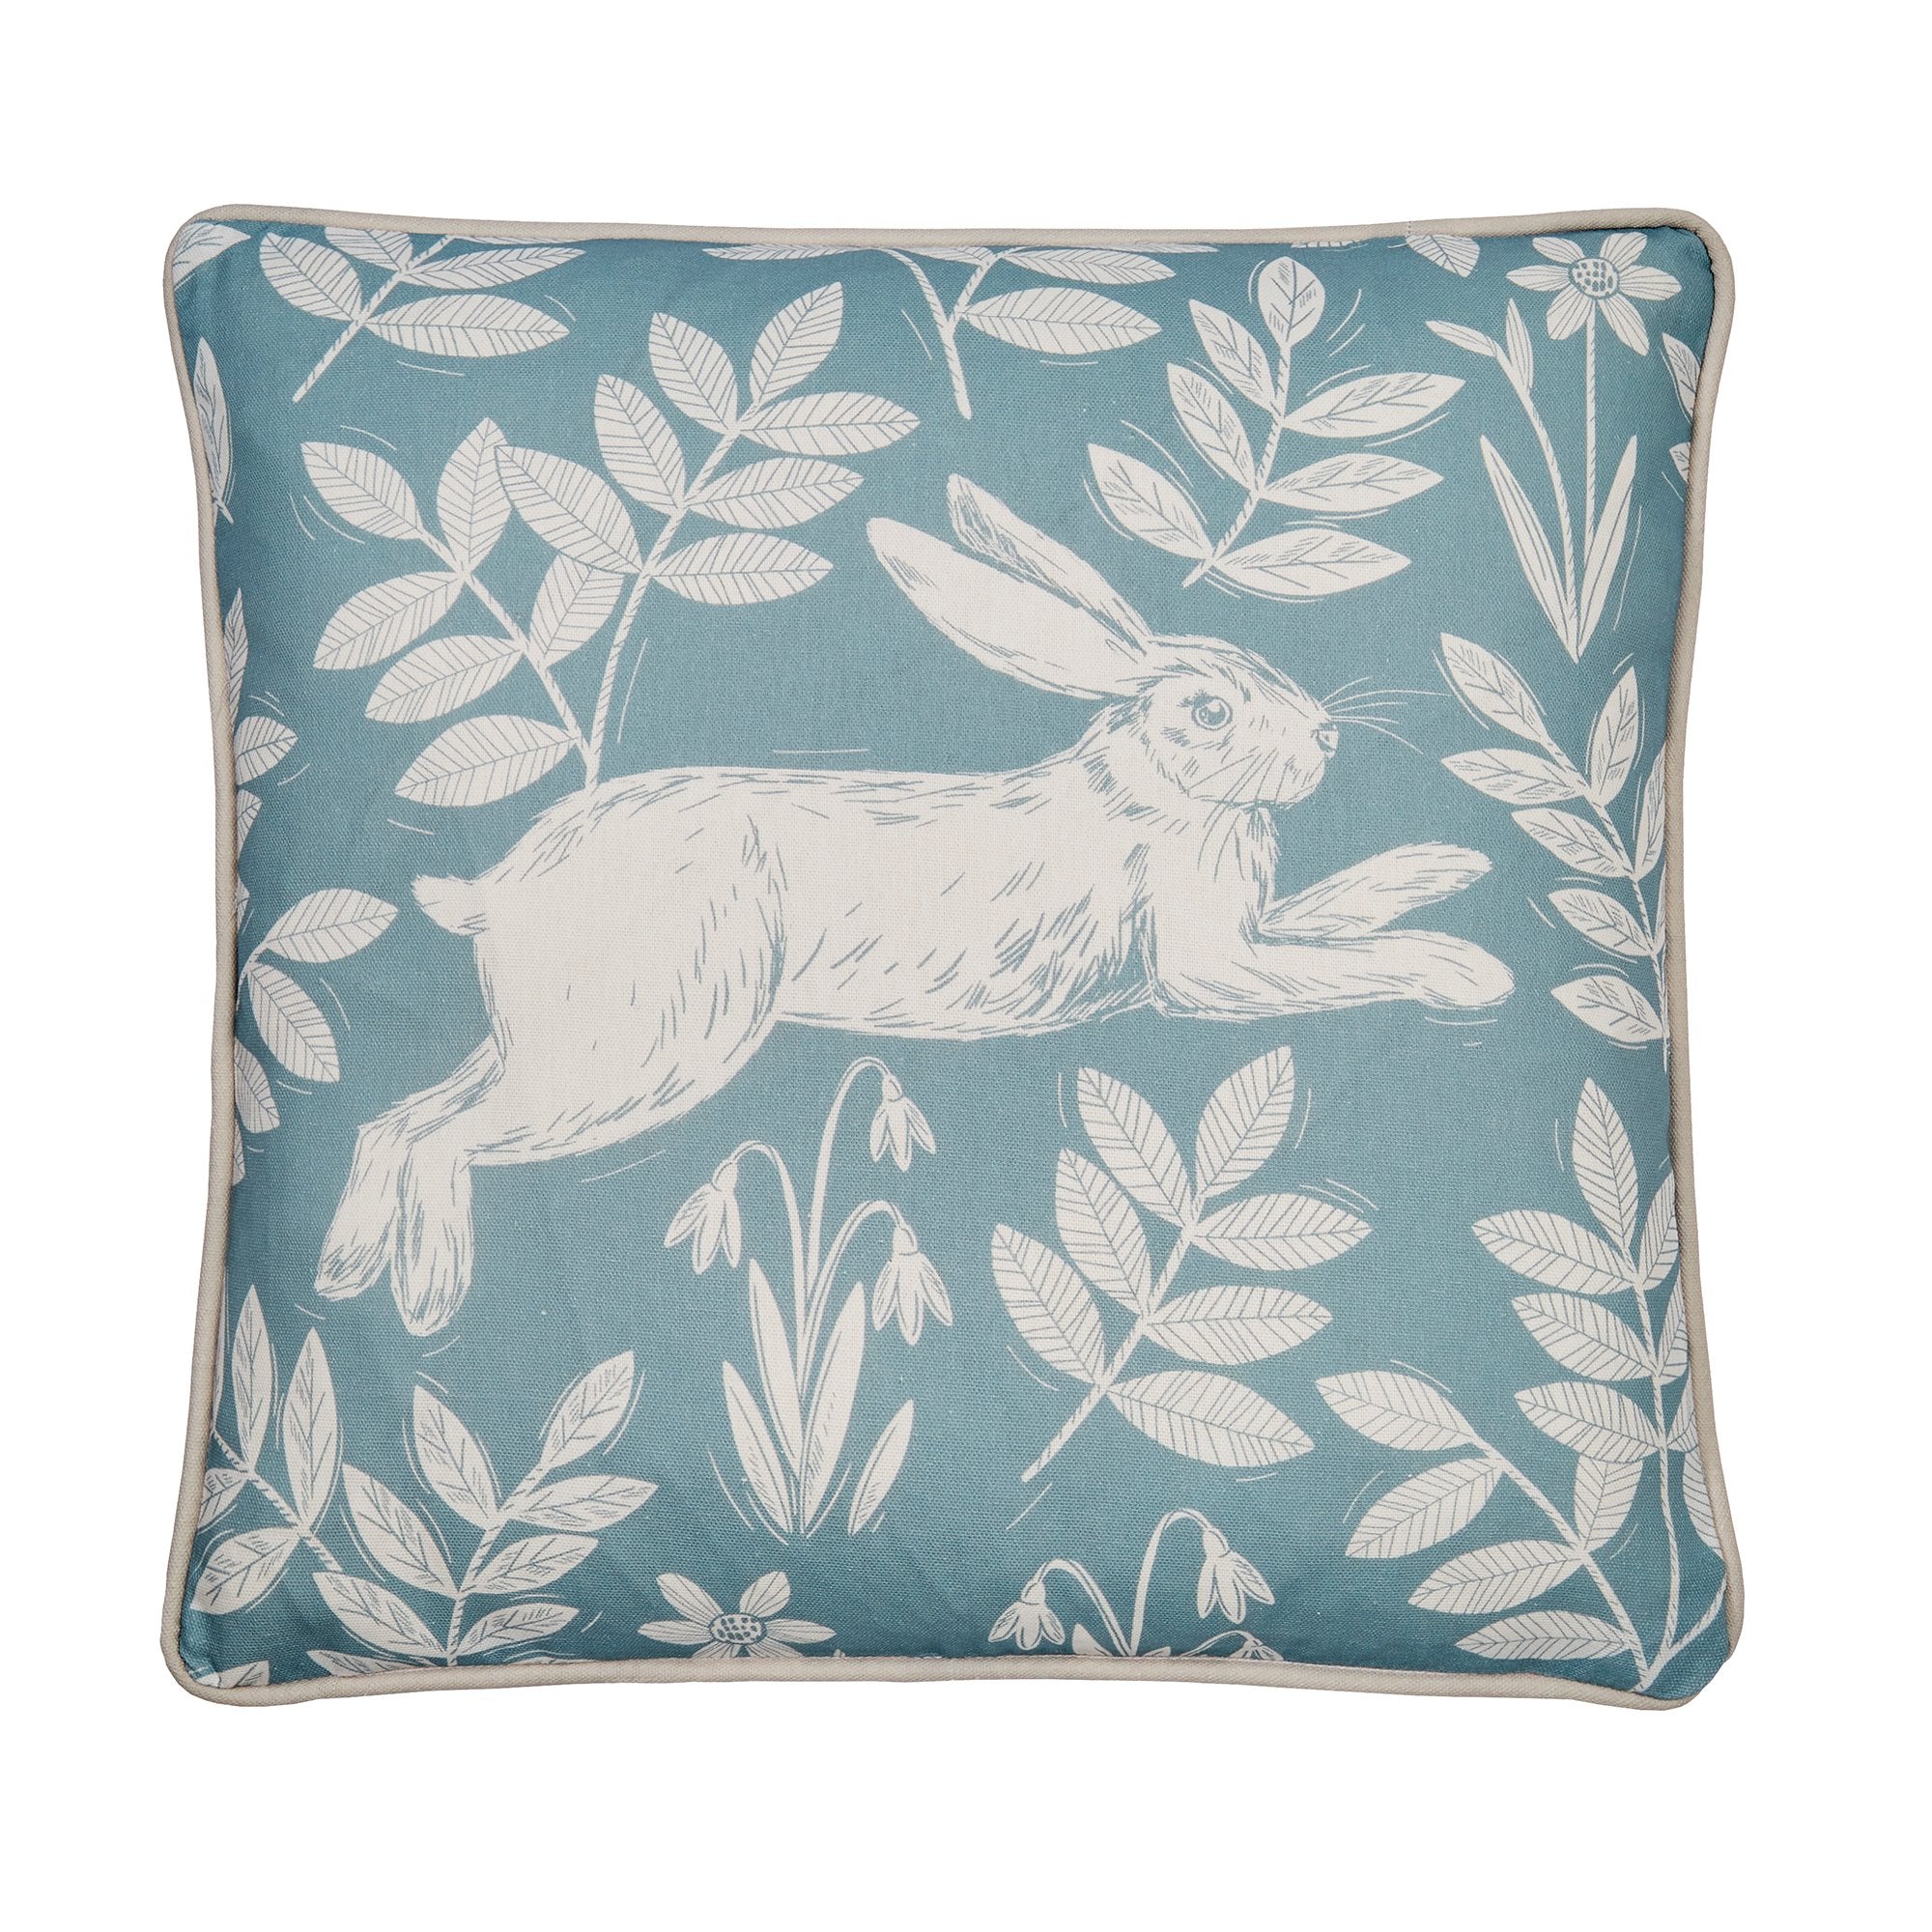 Cushion Spring Rabbit Outdoor by Dreams & Drapes Design in Duck Egg